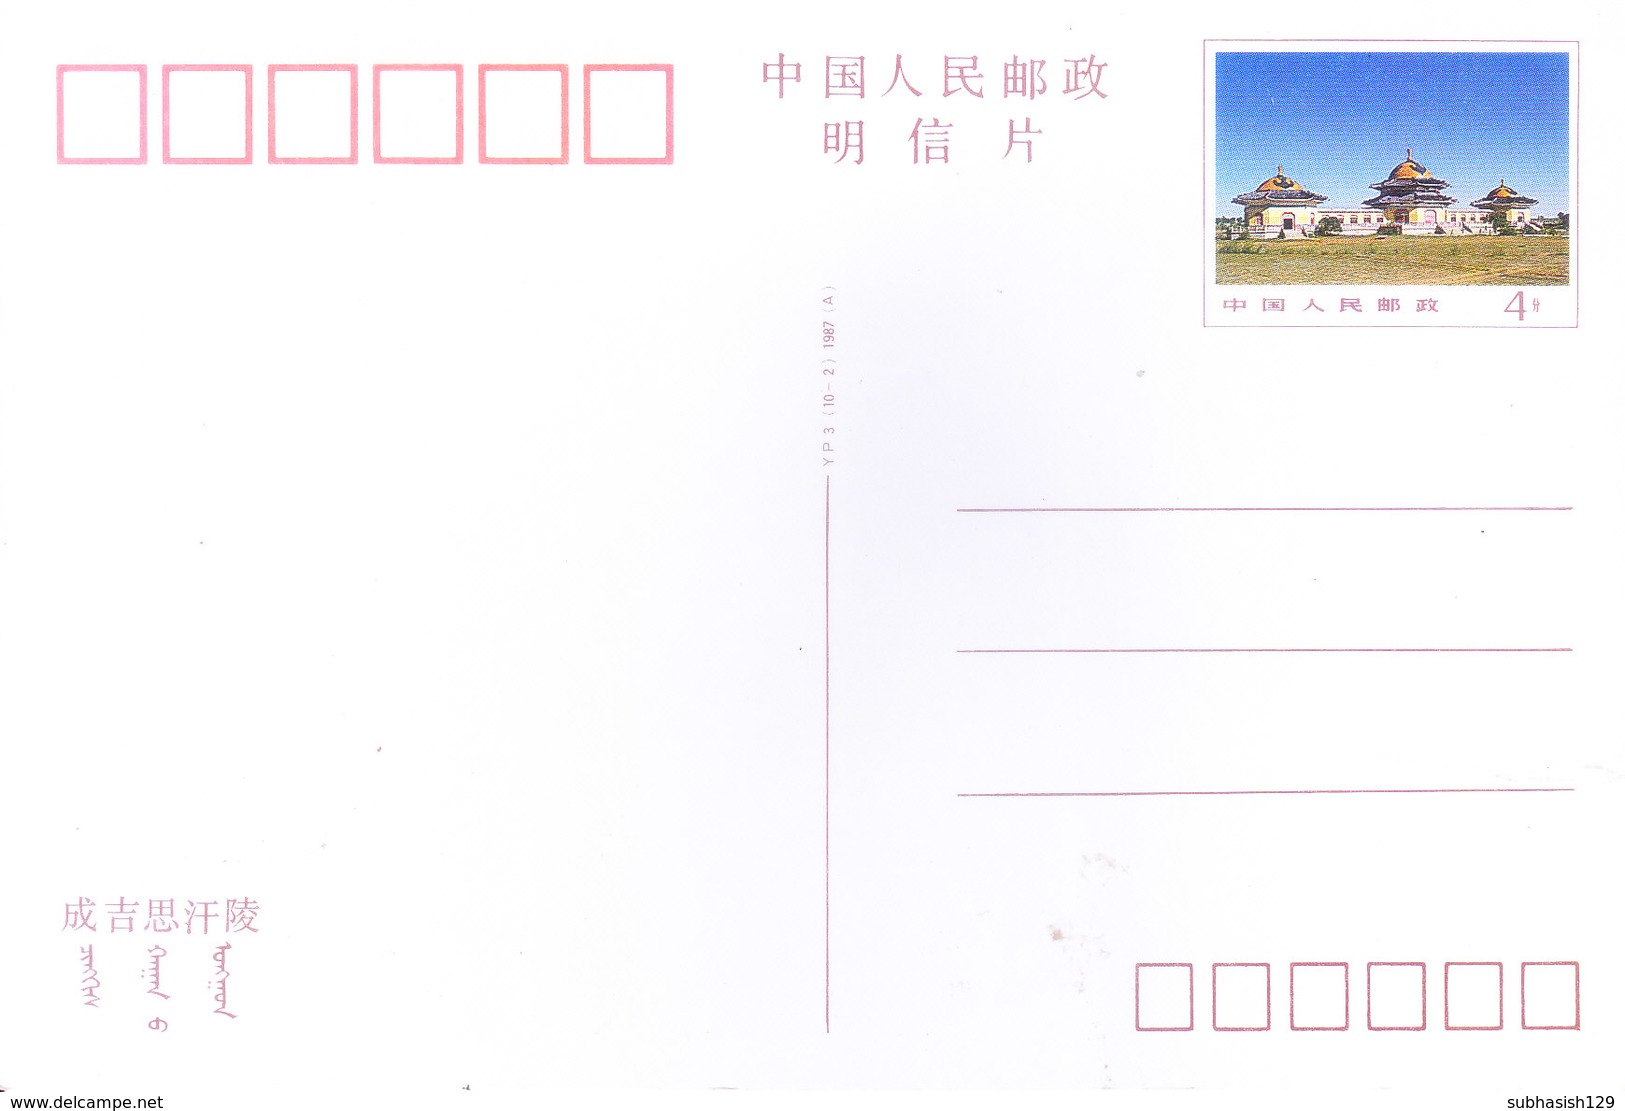 CHINA : OFFICIAL COLOUR PICTURE POST CARD : ISSUED BY DEPARTMENT OF POST : 1987 - Covers & Documents